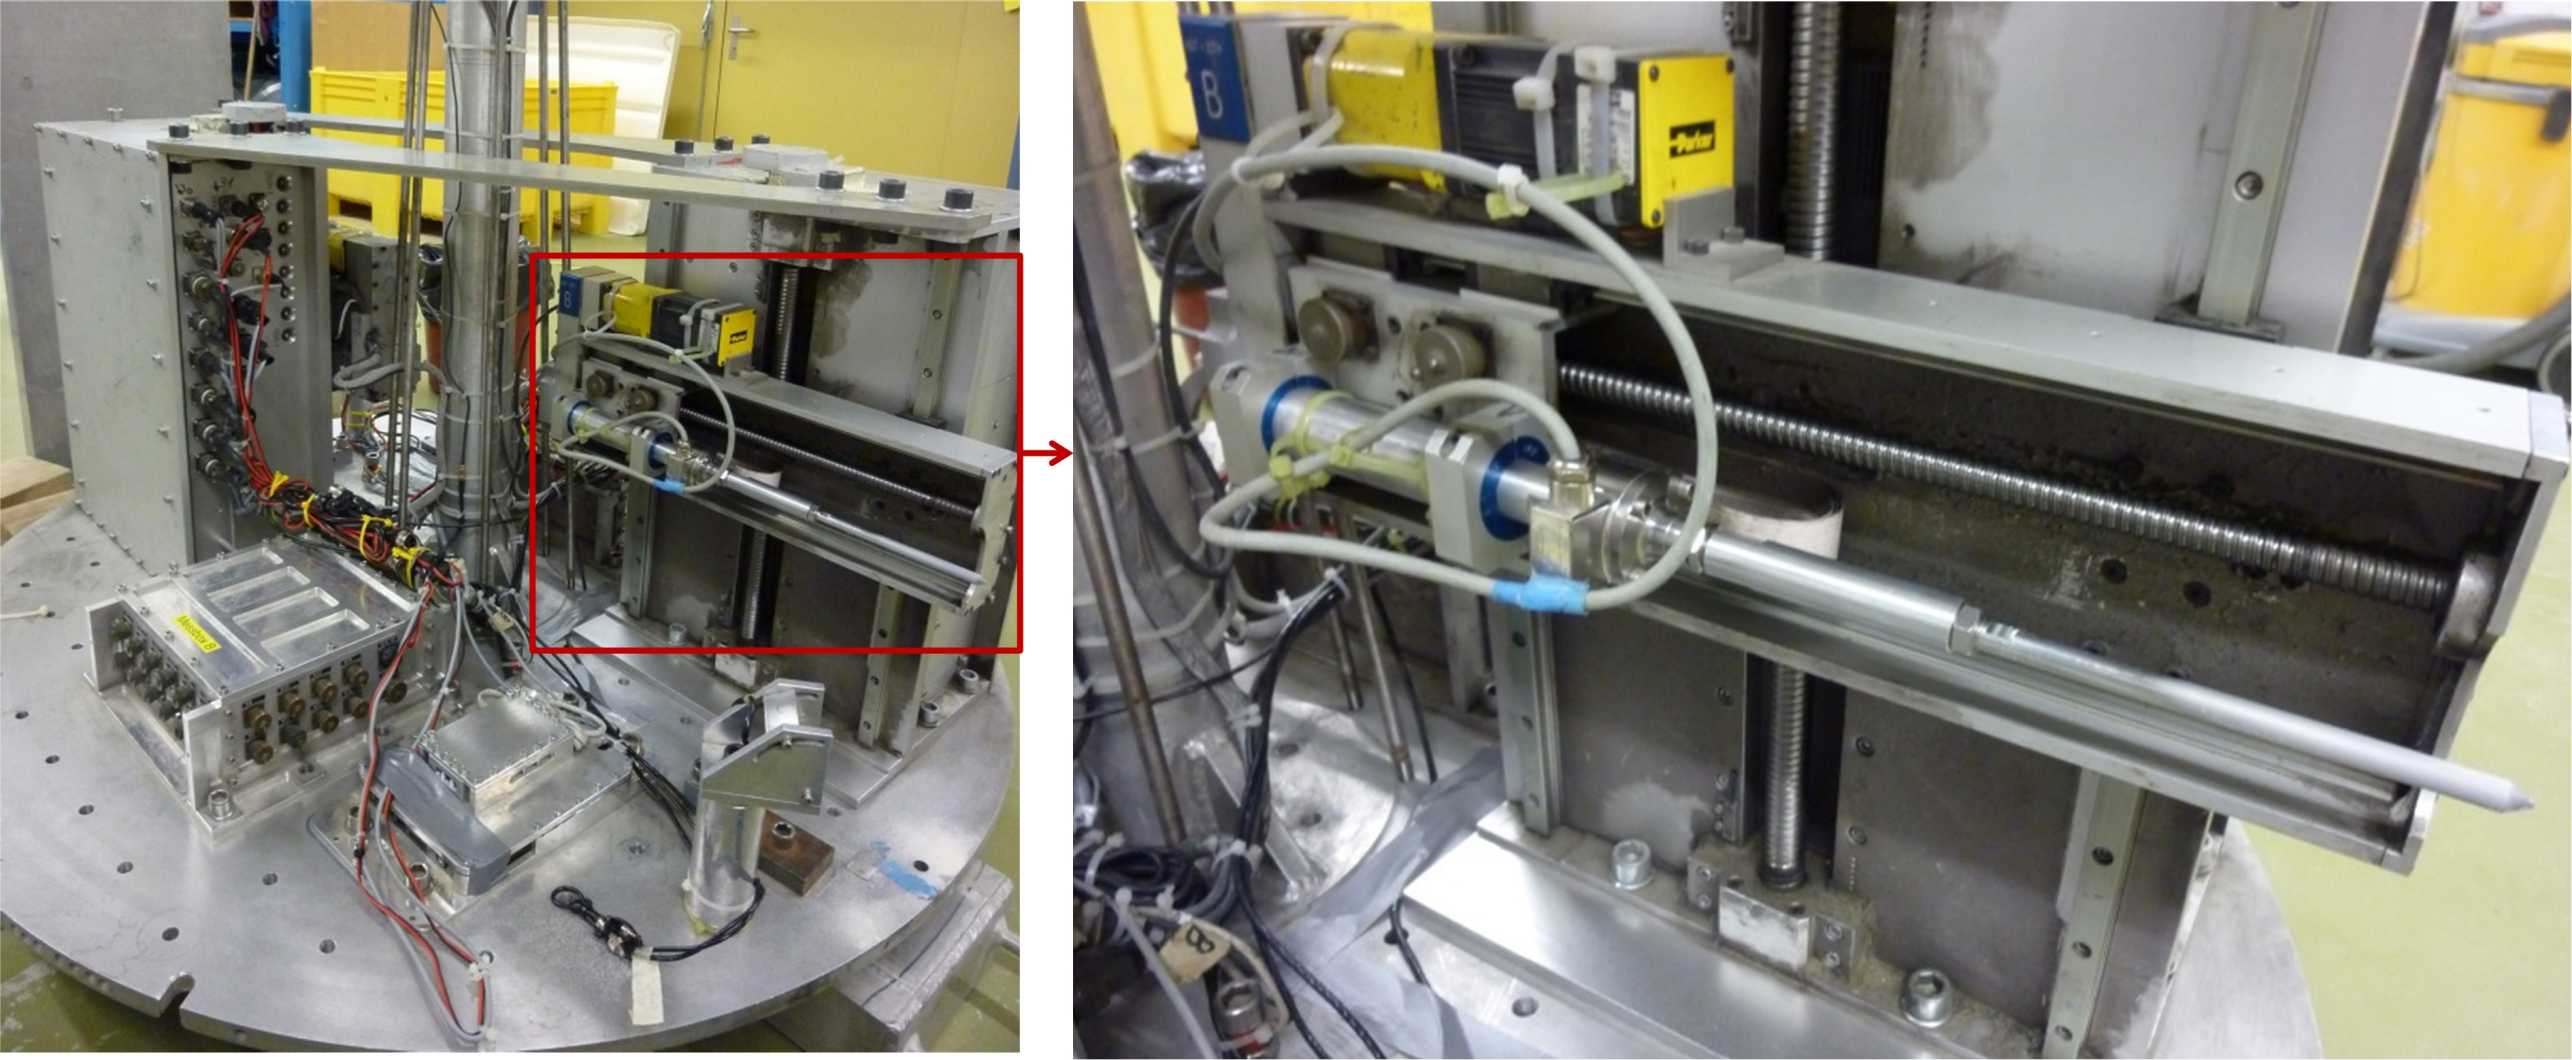 Tool platform (left) and zoomed-in detail of one of the actuators .